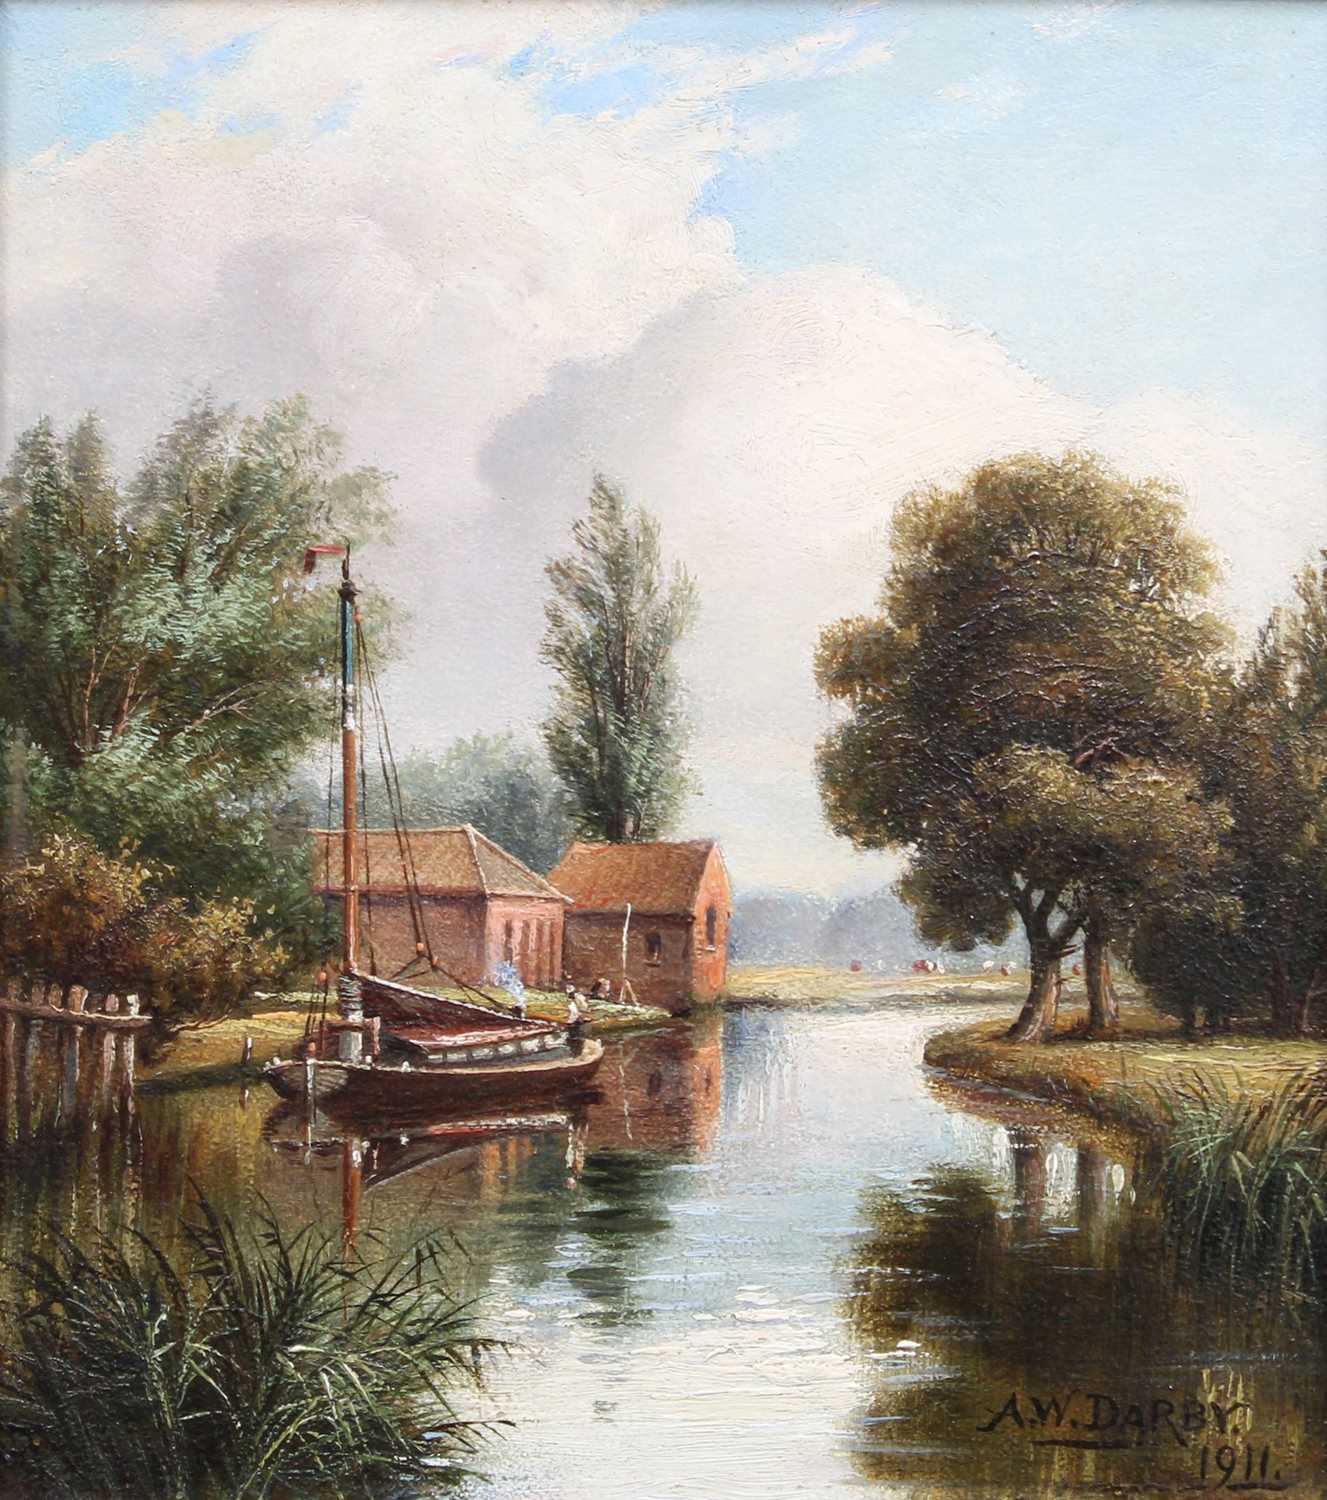 Alfred William Darby (1844-1916) "A river scene at Coltishall near Norwich" Signed and dated 1911,